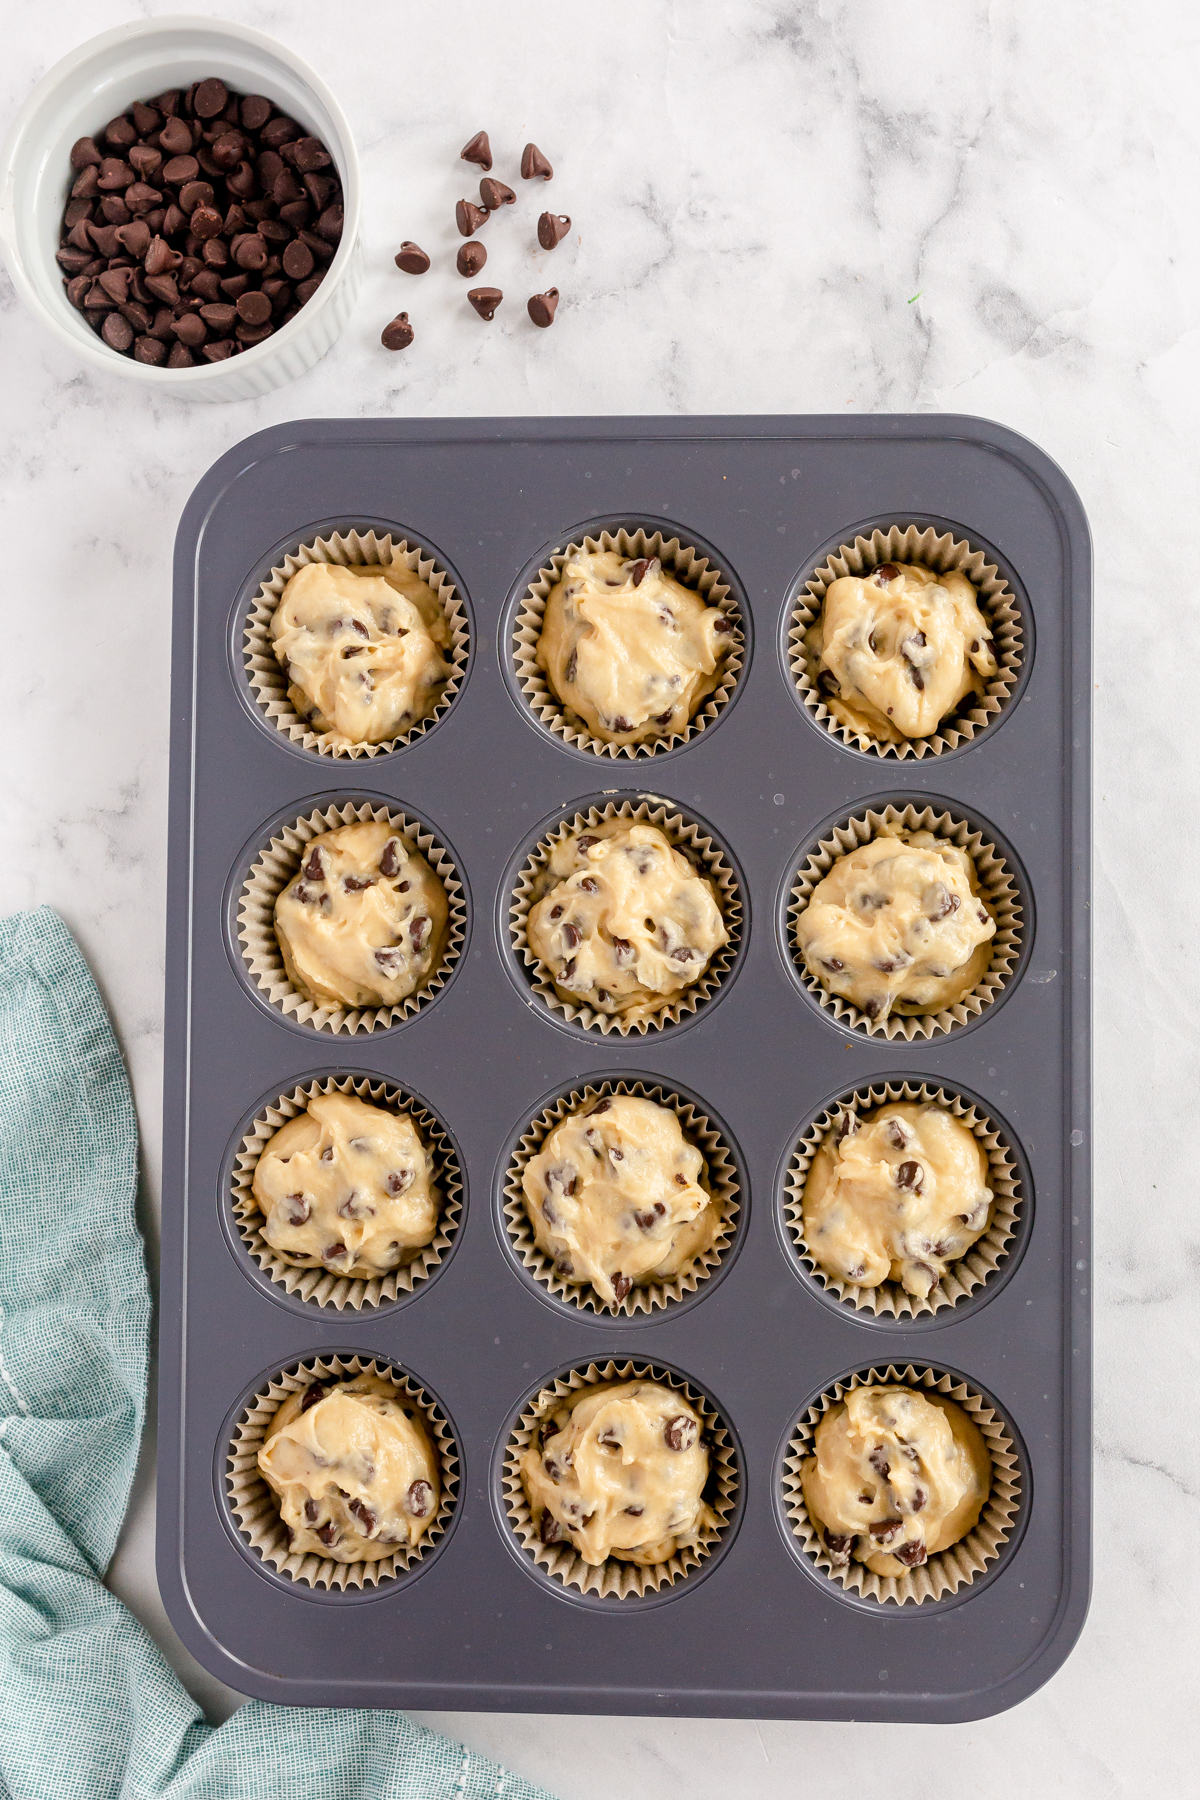 unbaked chocolate chip muffins in muffin tins